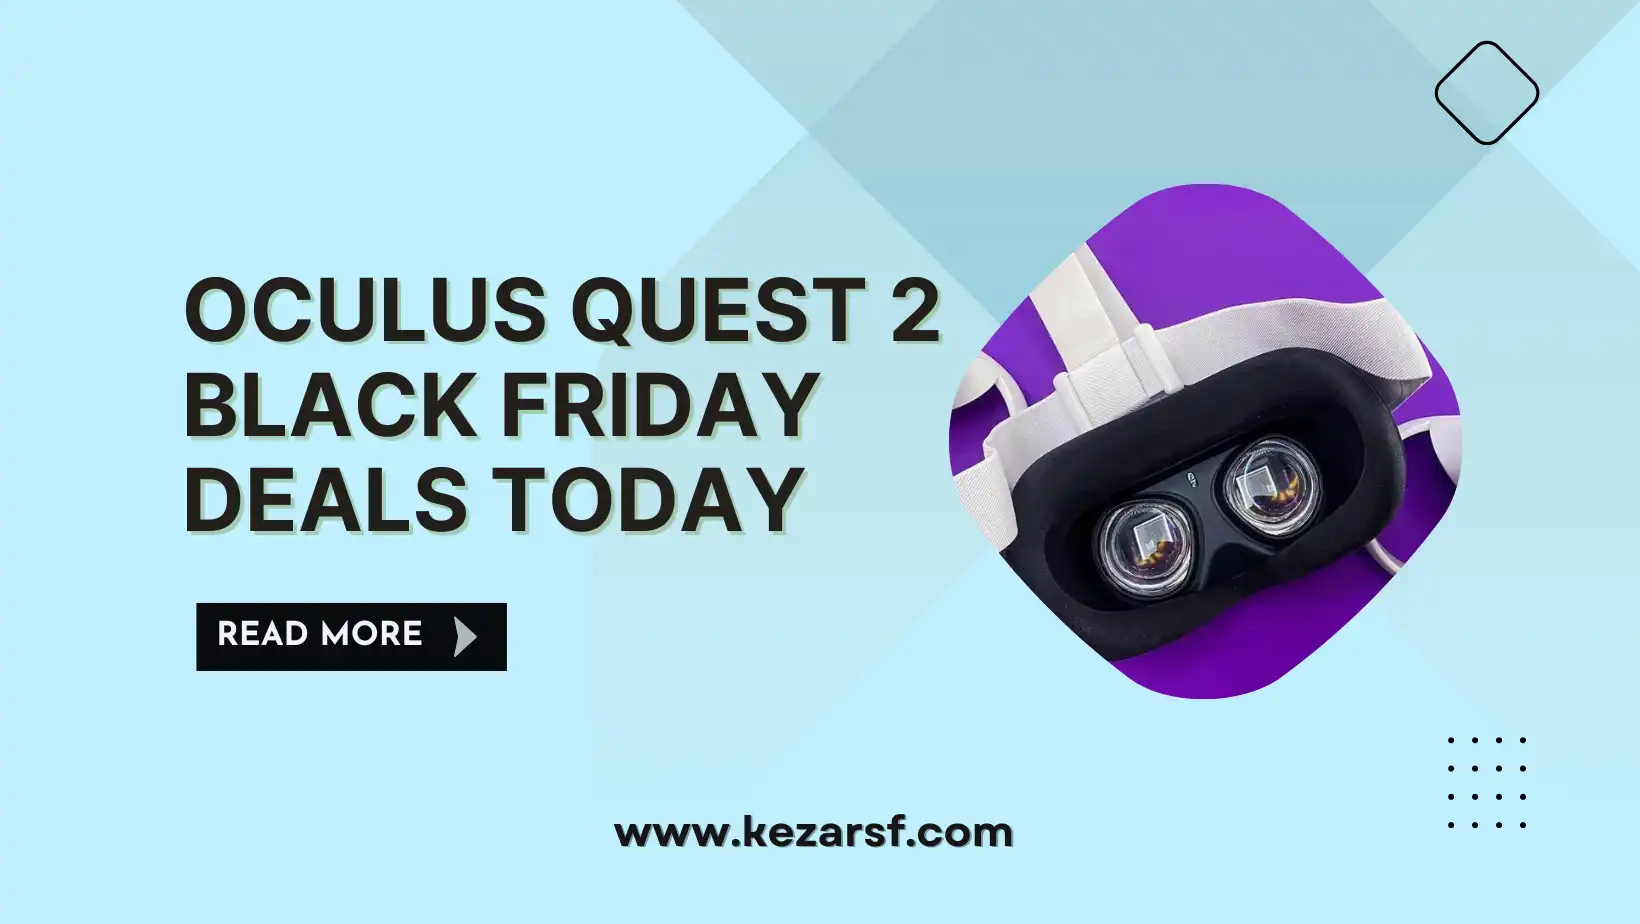 Oculus Quest 2 Black Friday: Date and Deals